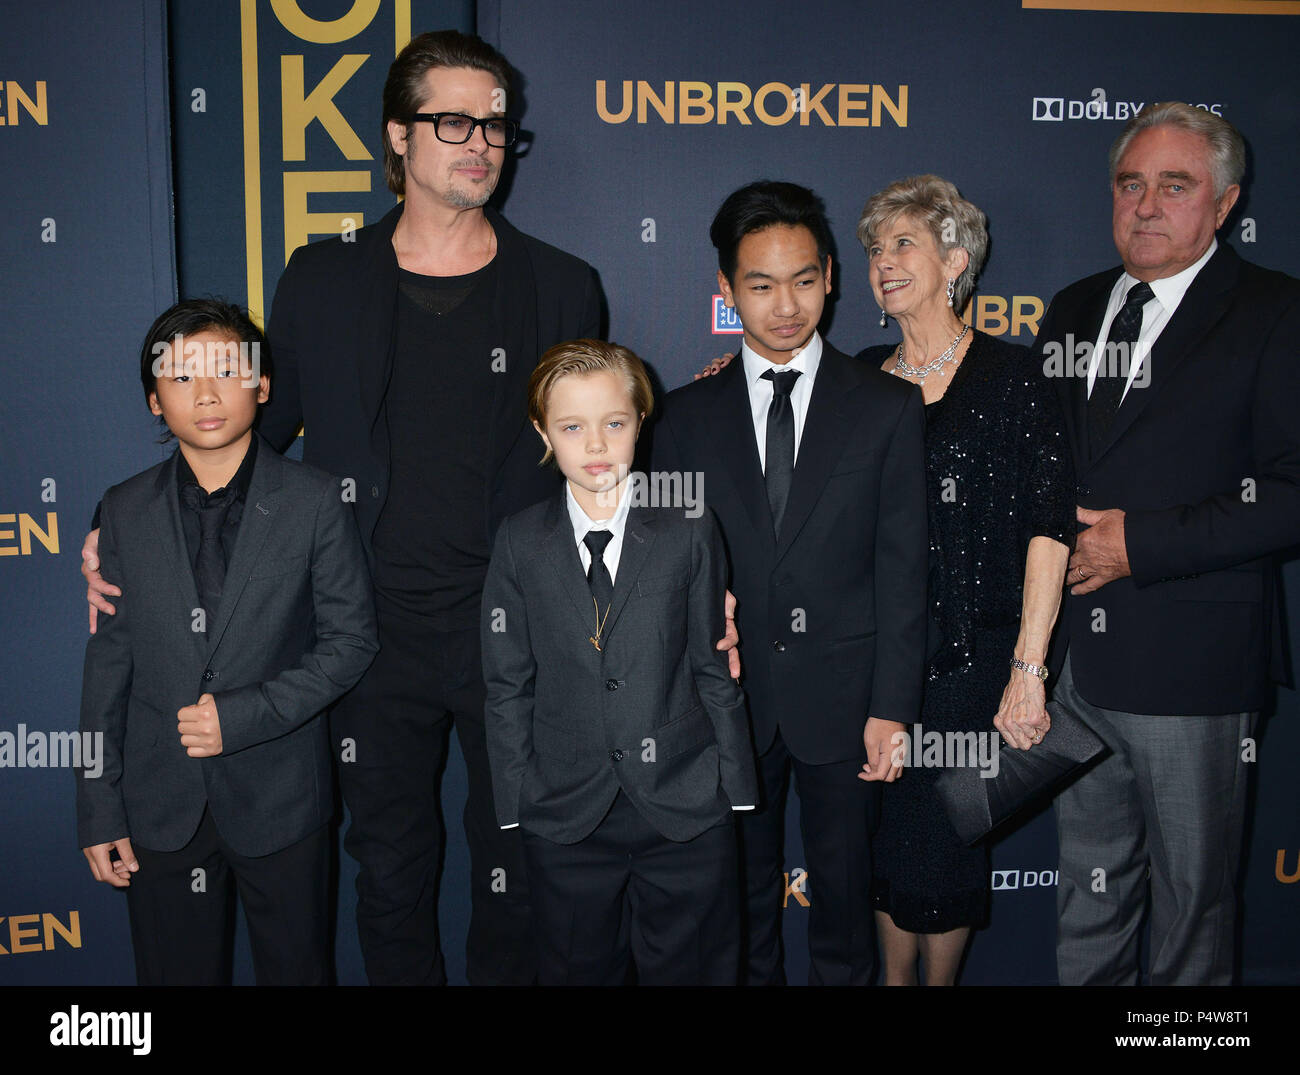 Brad Pitt, (L-R) Pax Thien Jolie-Pitt, Shiloh Nouvel Jolie-Pitt,, Maddox Jolie-Pitt, Jane Pitt, and William Pitt 047  at the Unbroken Premiere at the Dolby Theatre in Los Angeles. Dec. 14, 2014Brad Pitt, (L-R) Pax Thien Jolie-Pitt, Shiloh Nouvel Jolie-Pitt,, Maddox Jolie-Pitt, Jane Pitt, and William Pitt 047 ------------- Red Carpet Event, Vertical, USA, Film Industry, Celebrities,  Photography, Bestof, Arts Culture and Entertainment, Topix Celebrities fashion /  Vertical, Best of, Event in Hollywood Life - California,  Red Carpet and backstage, USA, Film Industry, Celebrities,  movie celebrit Stock Photo